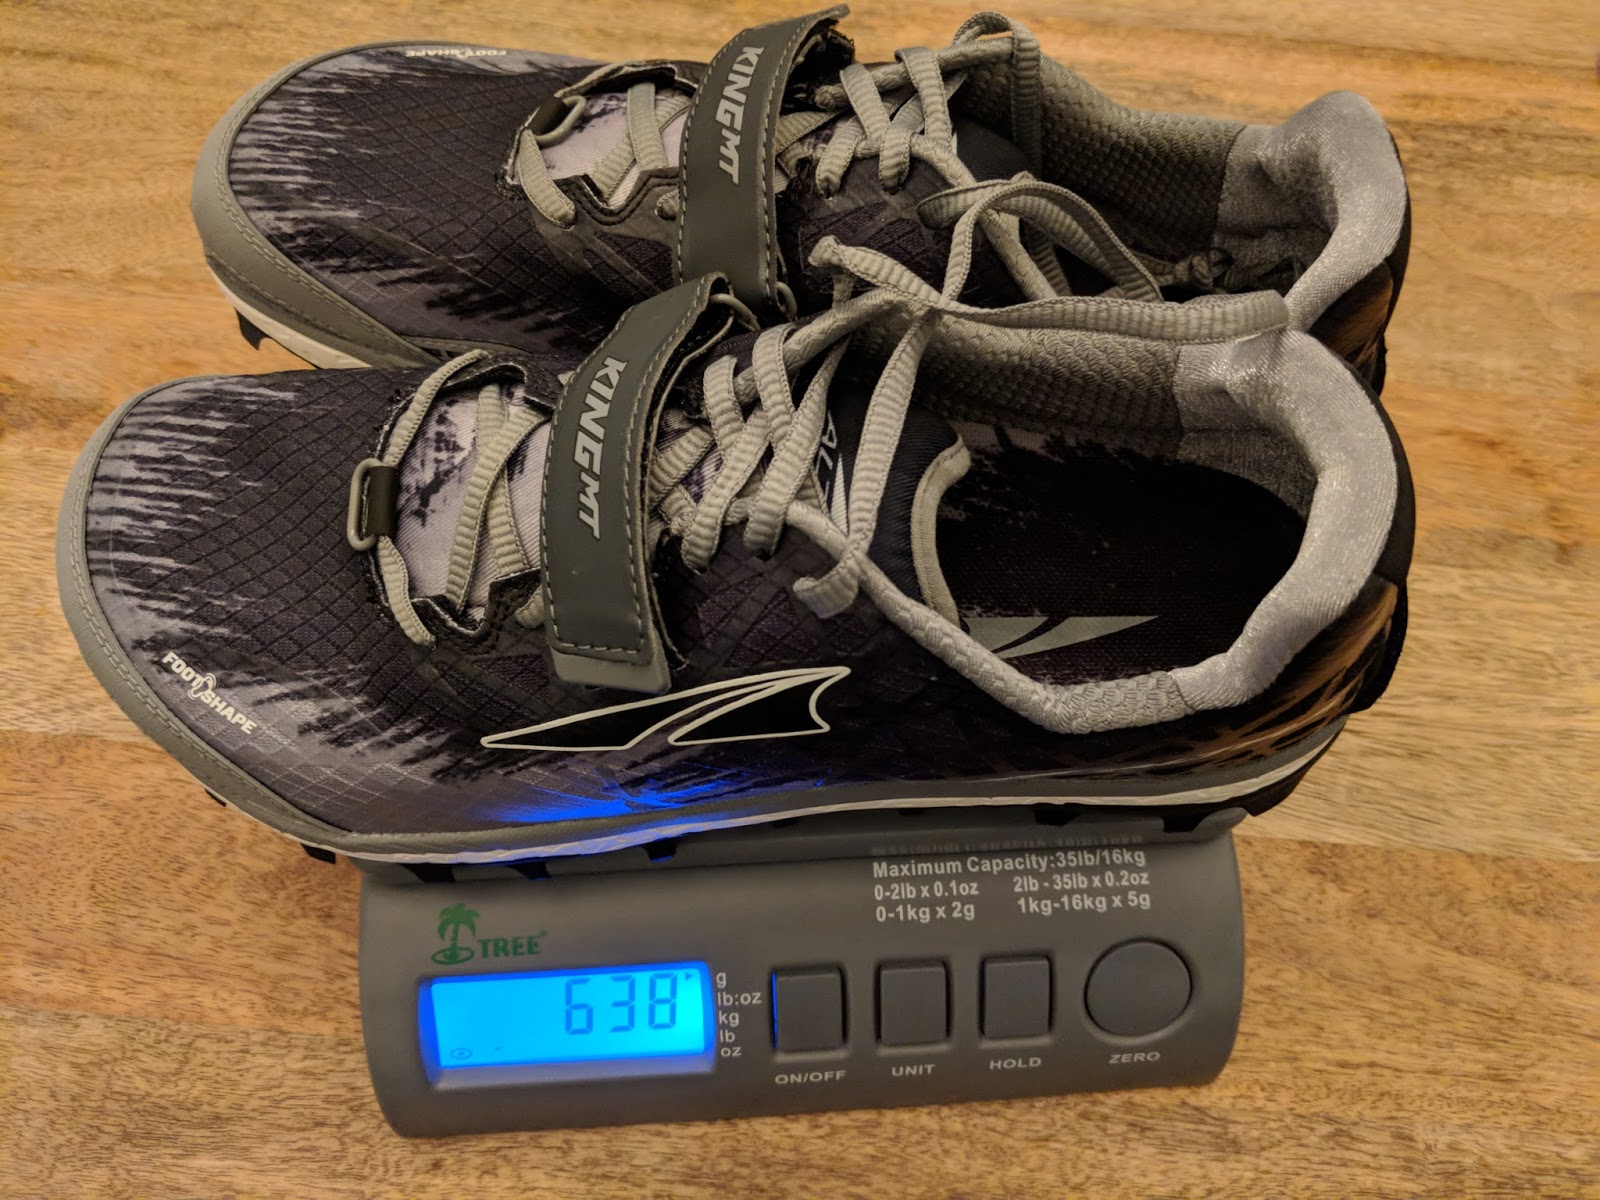 Buy altra king mt 1.5 review cheap online